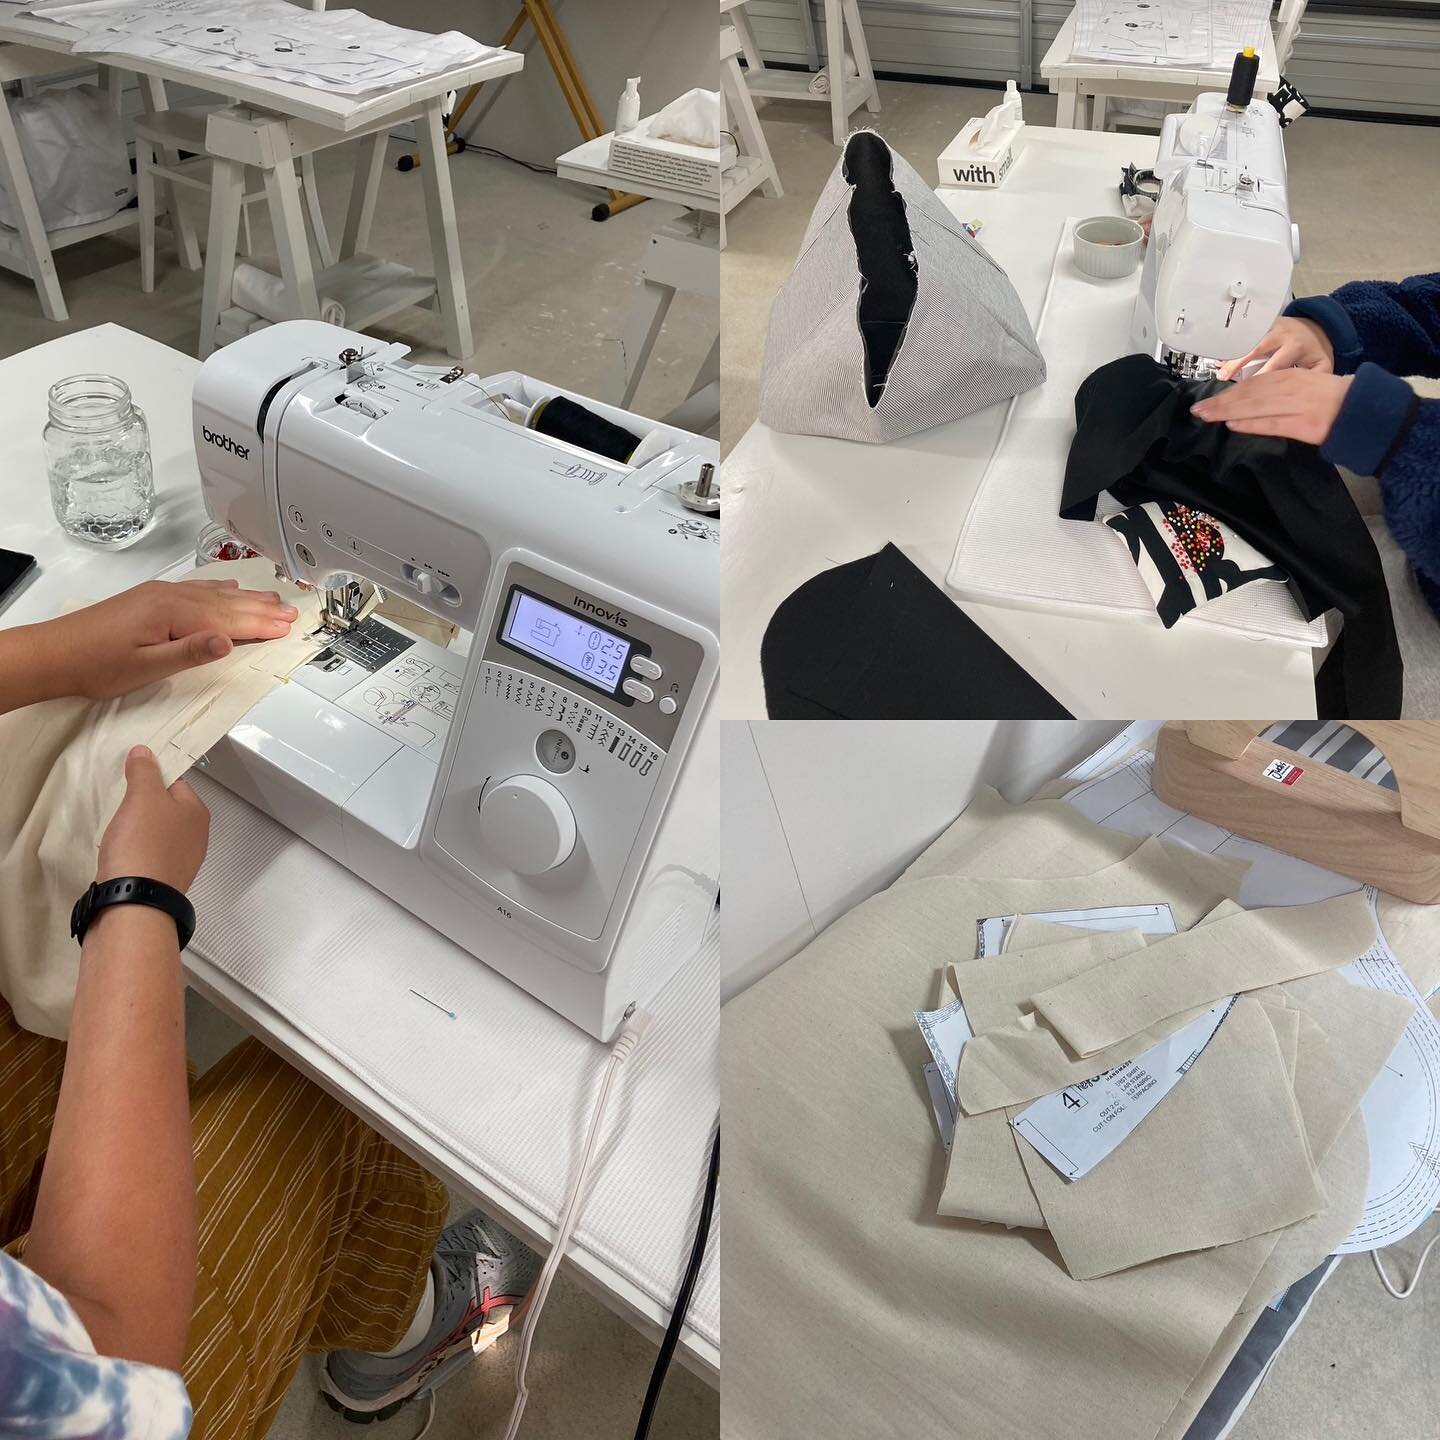 Week Two - Term One ✅
A great week of making in the workroom. The kids completed their second project, a lunch bag while the teens made good progress on their own projects. 

#audsleysarahdesigns #sewingschool #sewingschoolchch #sewnz #sewchch #maker